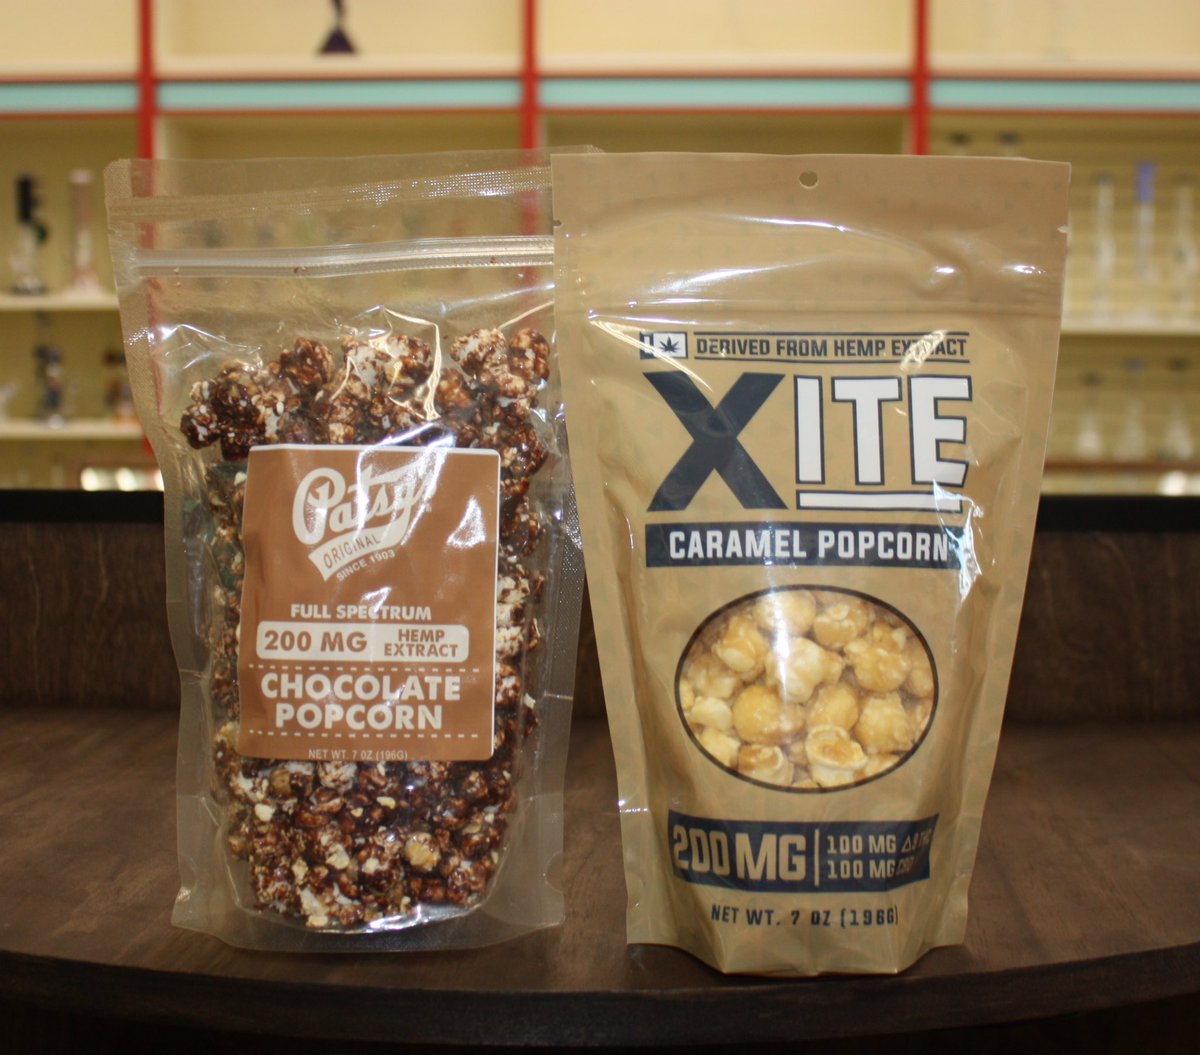 Elevate your snacking with these delicious infused delta9 popcorns! Delta9 gives you a high euphoric feeling and this popcorn also tastes super yummy! Check them out on our website at wildleaftobacco.com #xite #popcorn #delta9 #adulttreats #wildleaf